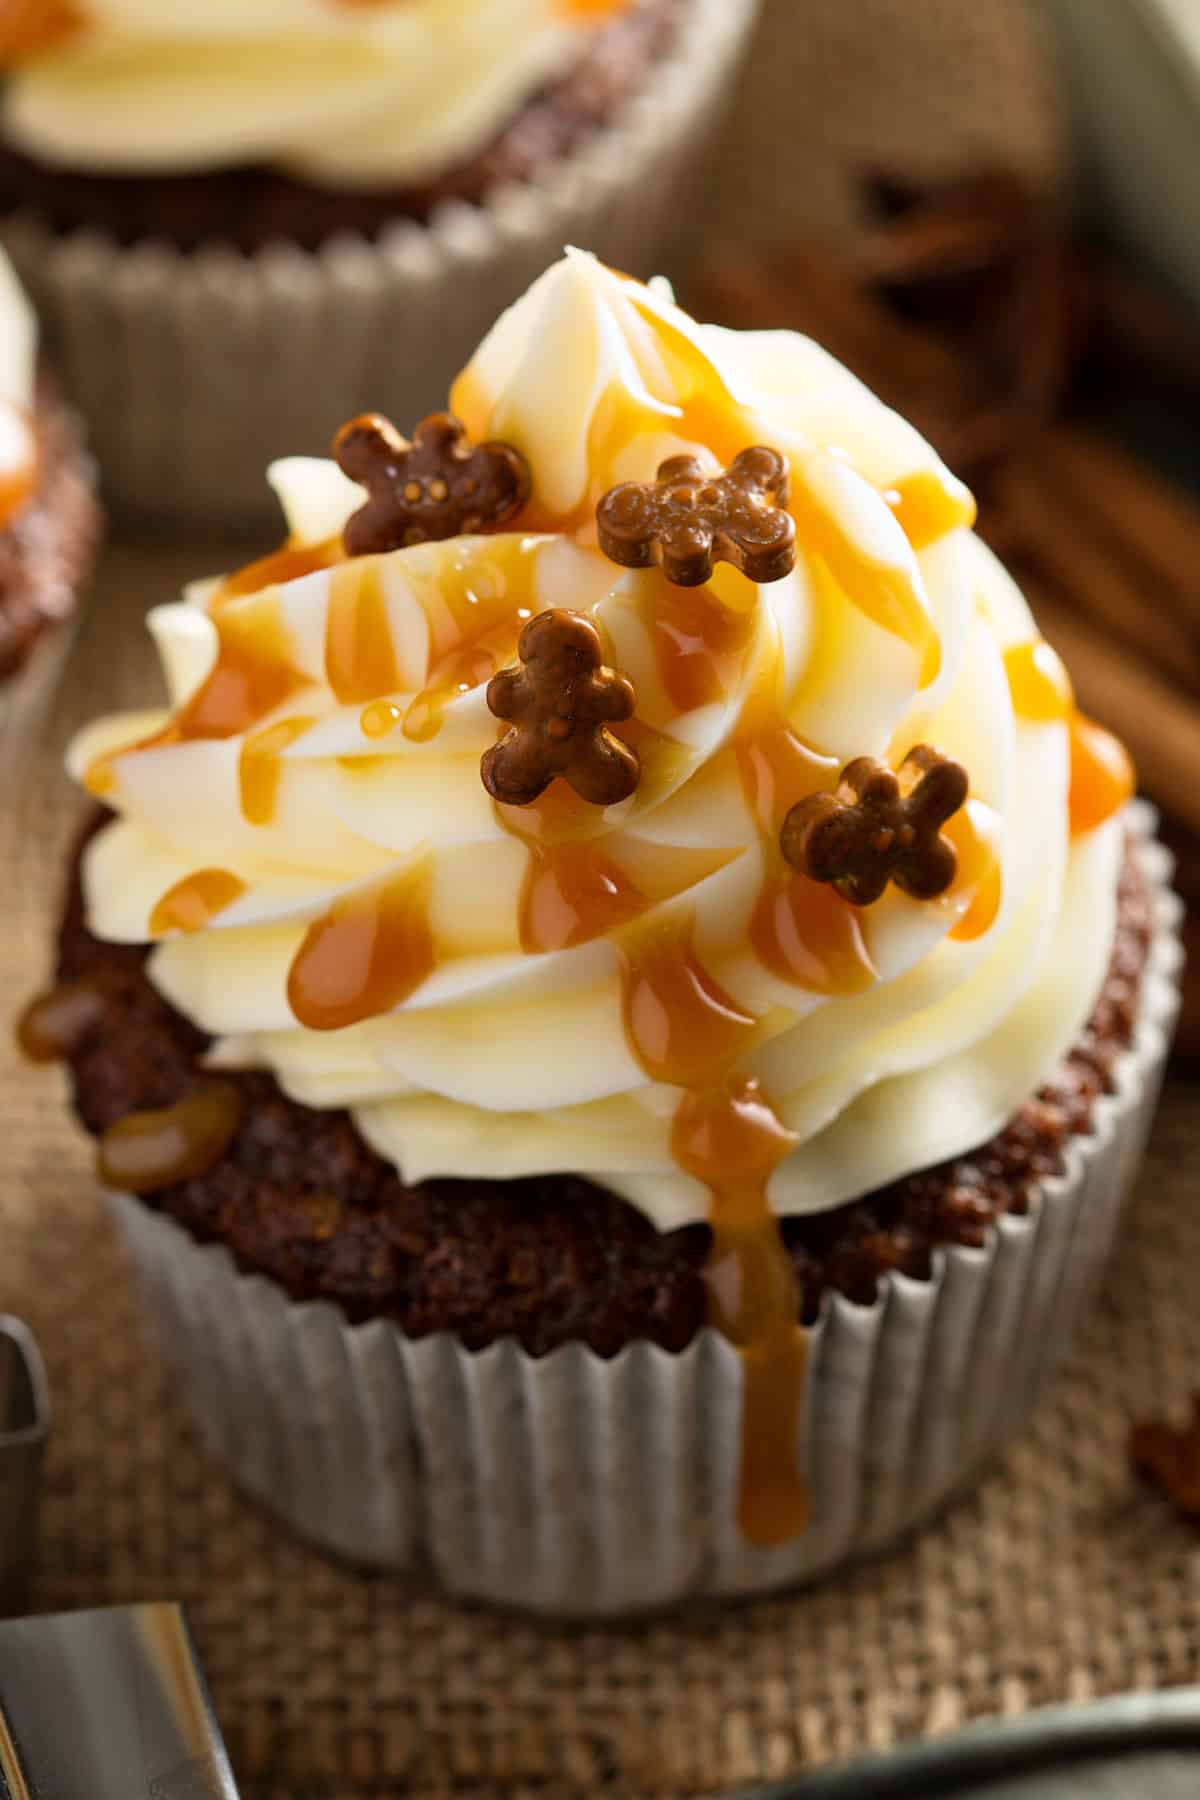 A gingerbread cupcake with cream cheese frosting on top with gingerbread sprinkles.